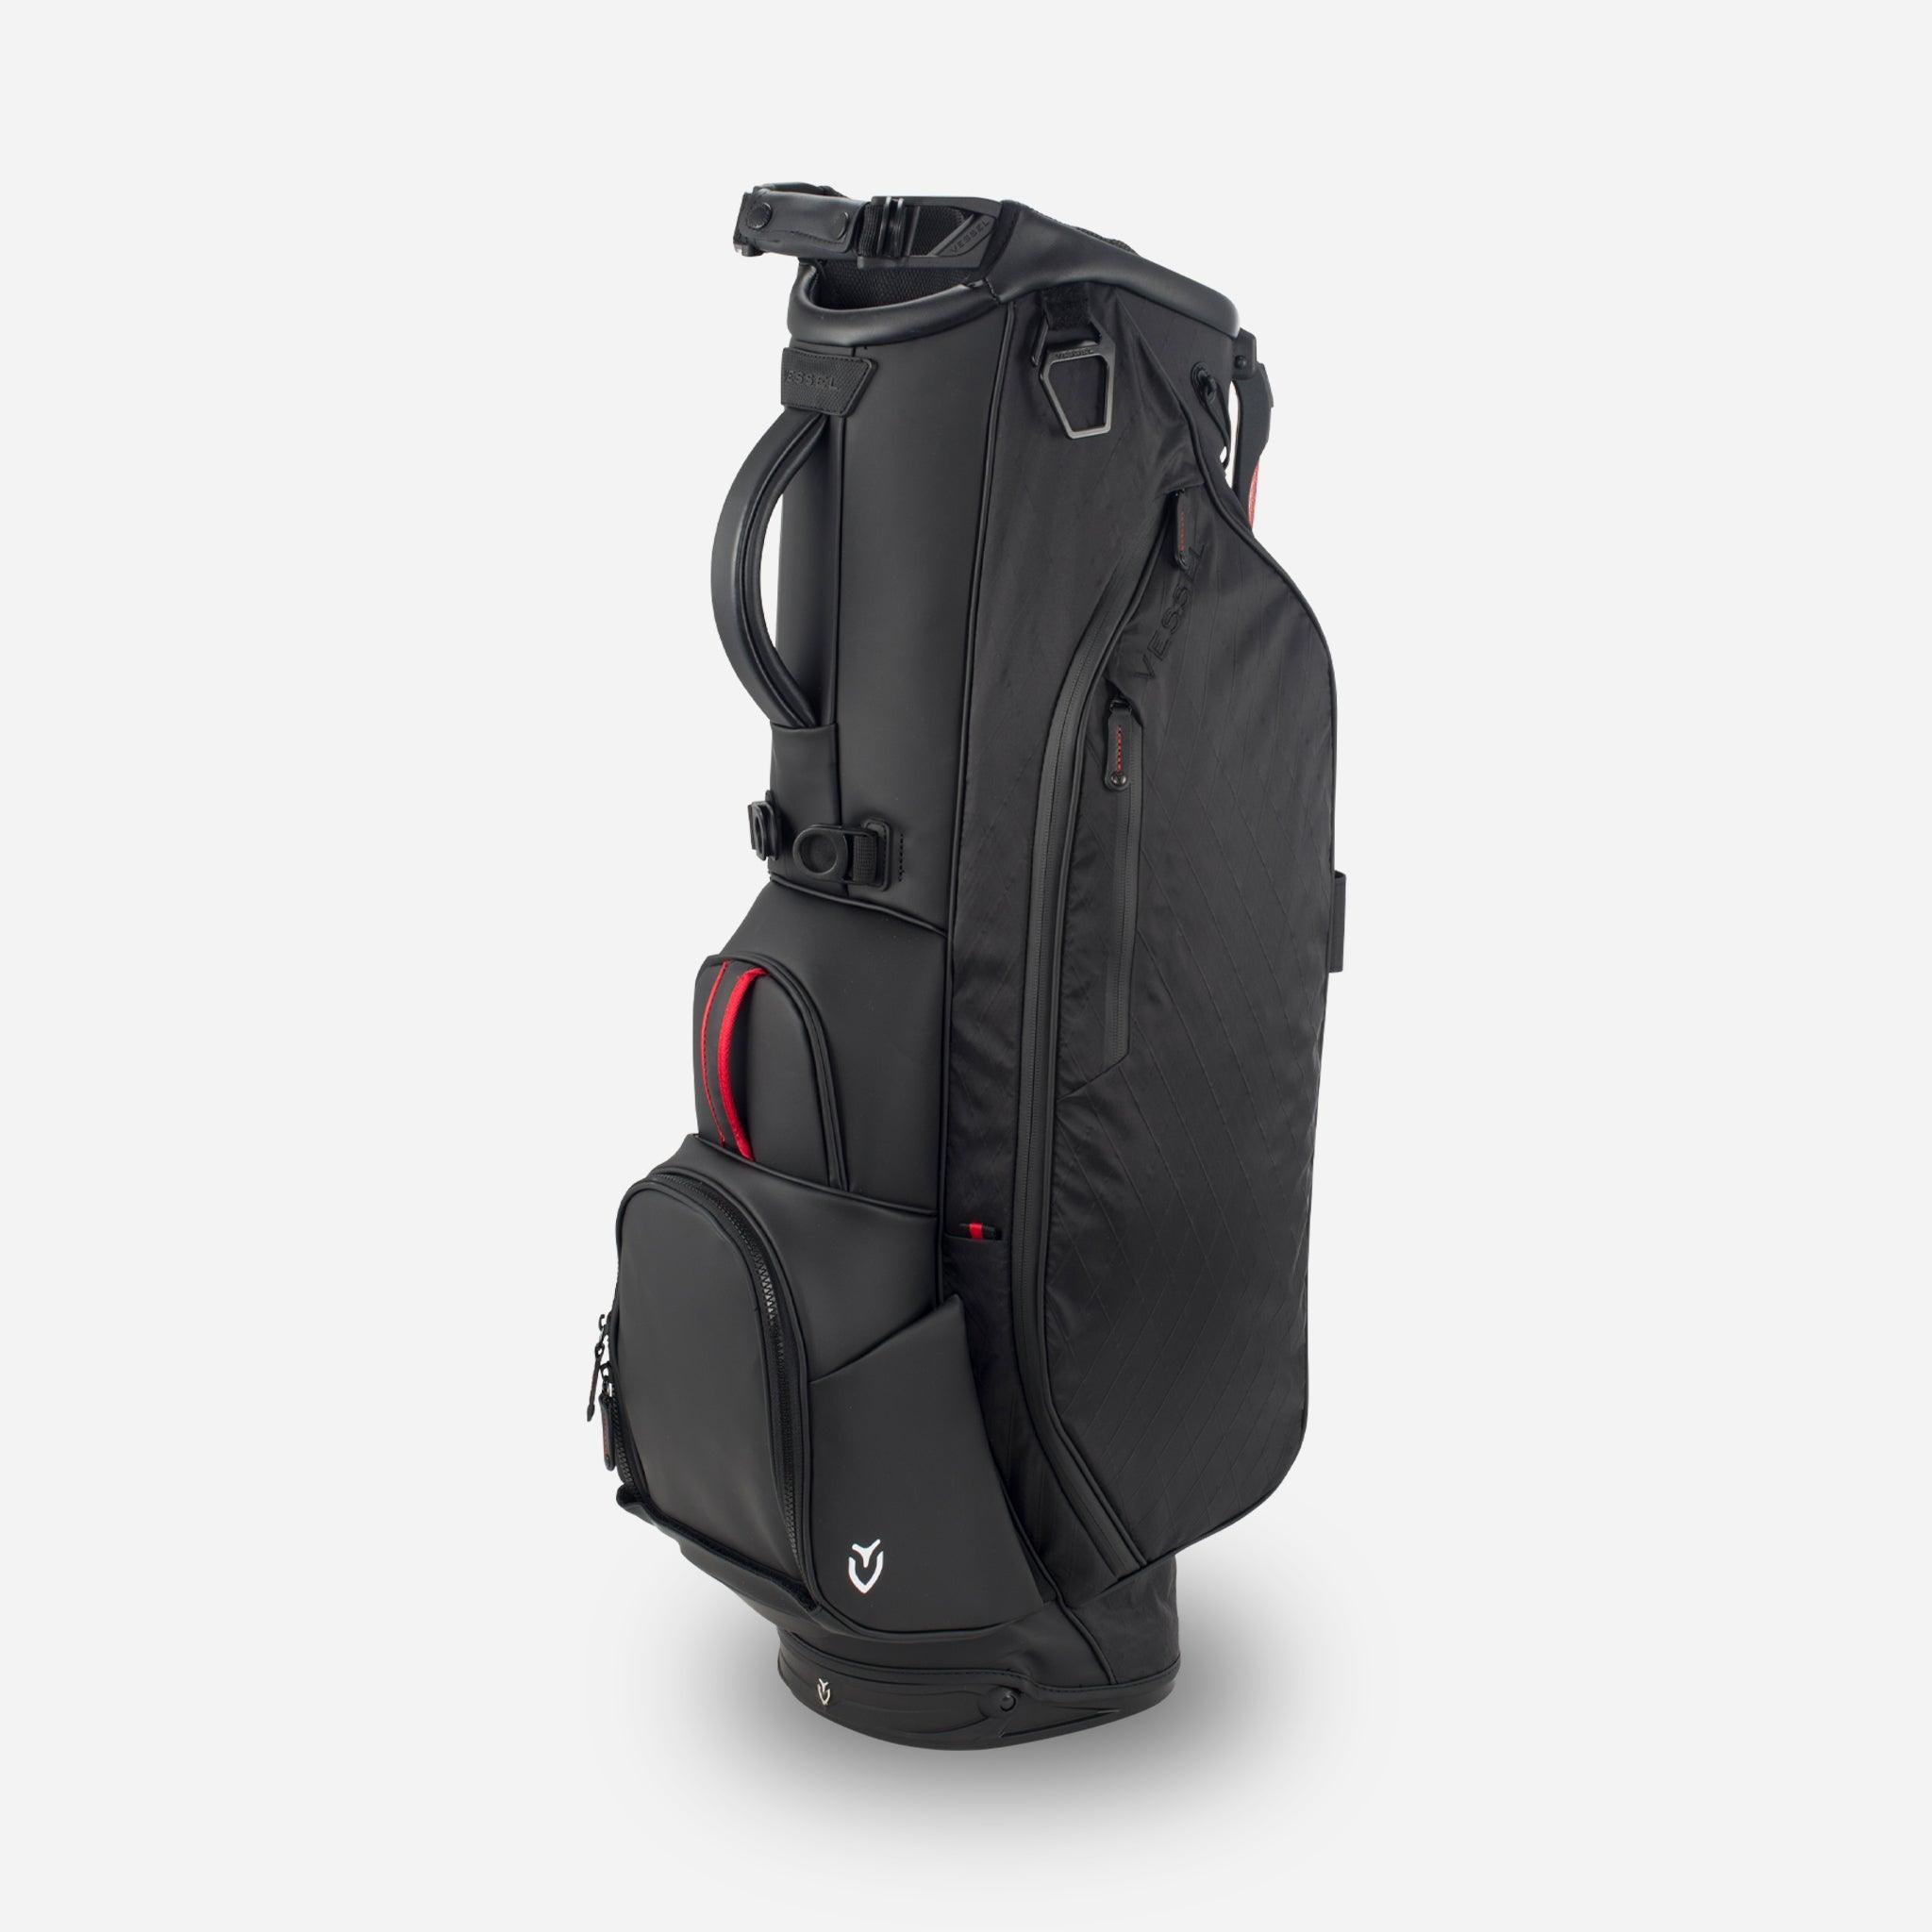 Want the Ultimate in Lightweight Golf Stand Bags? Consider DXR Material